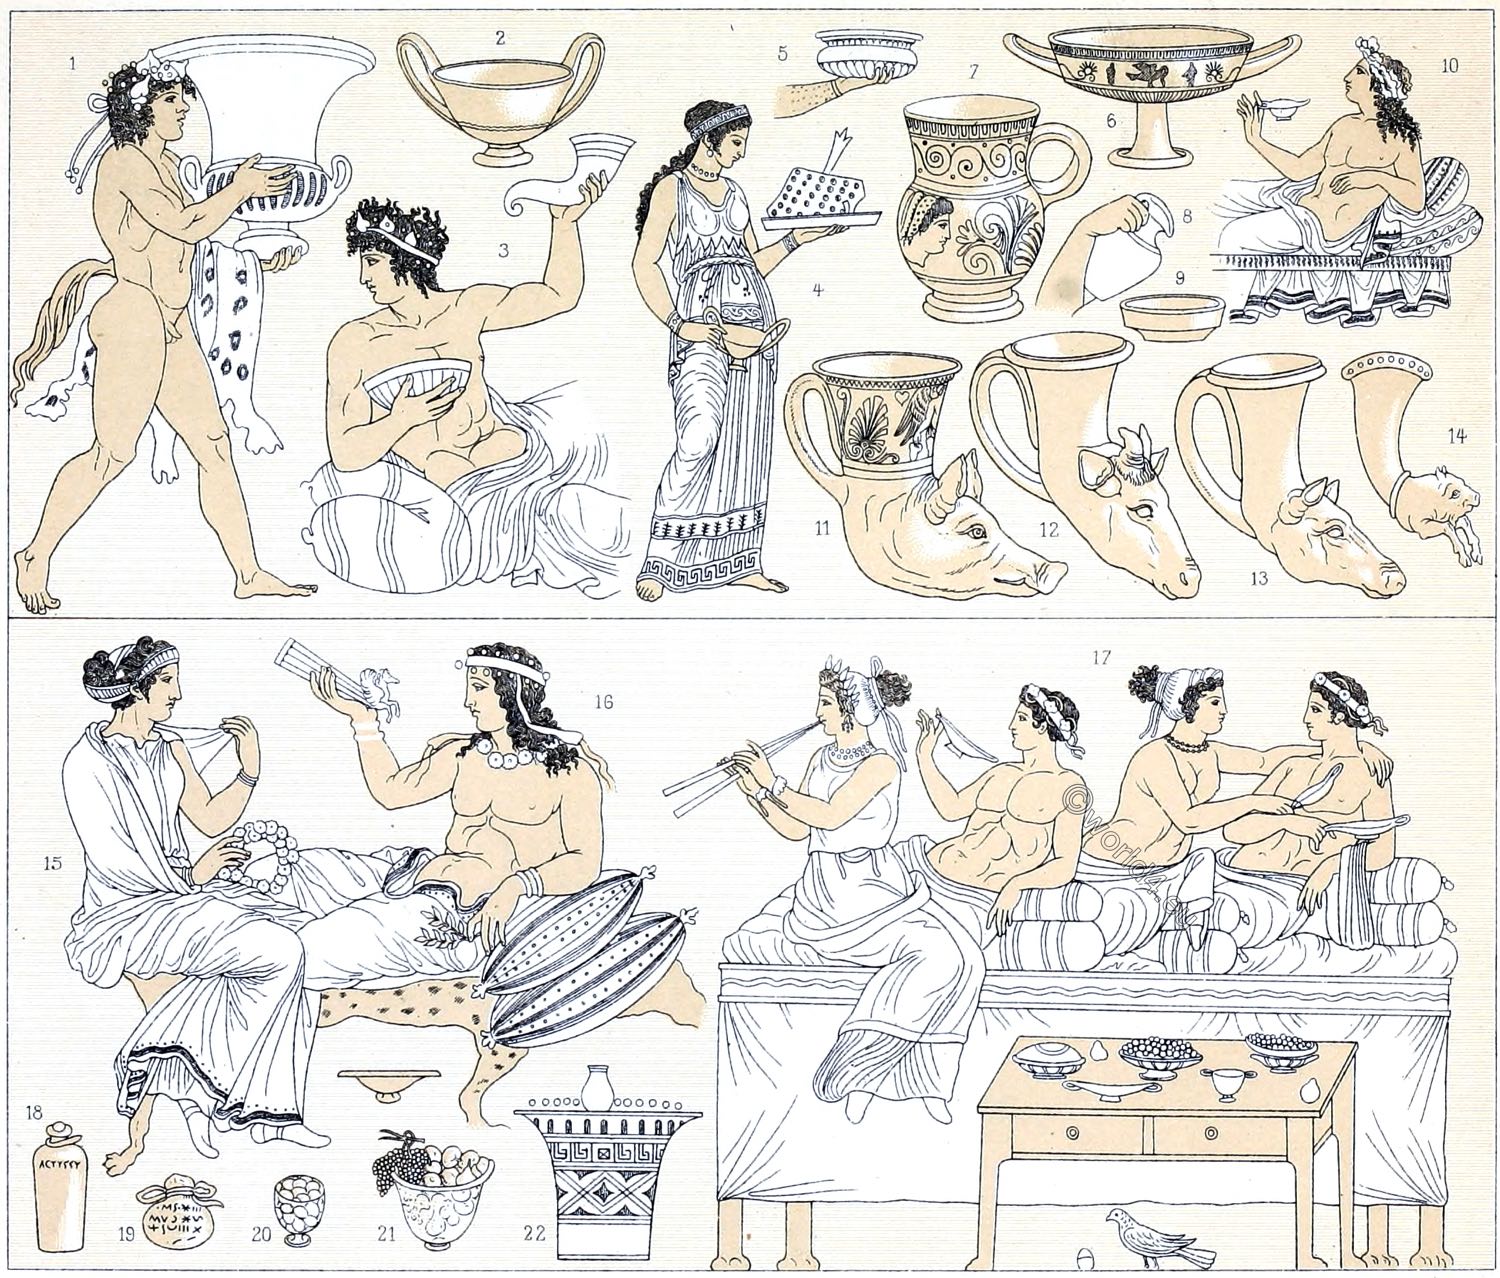 Ancient Greece. Table manners. Meals, Banquet, Table Equipment.